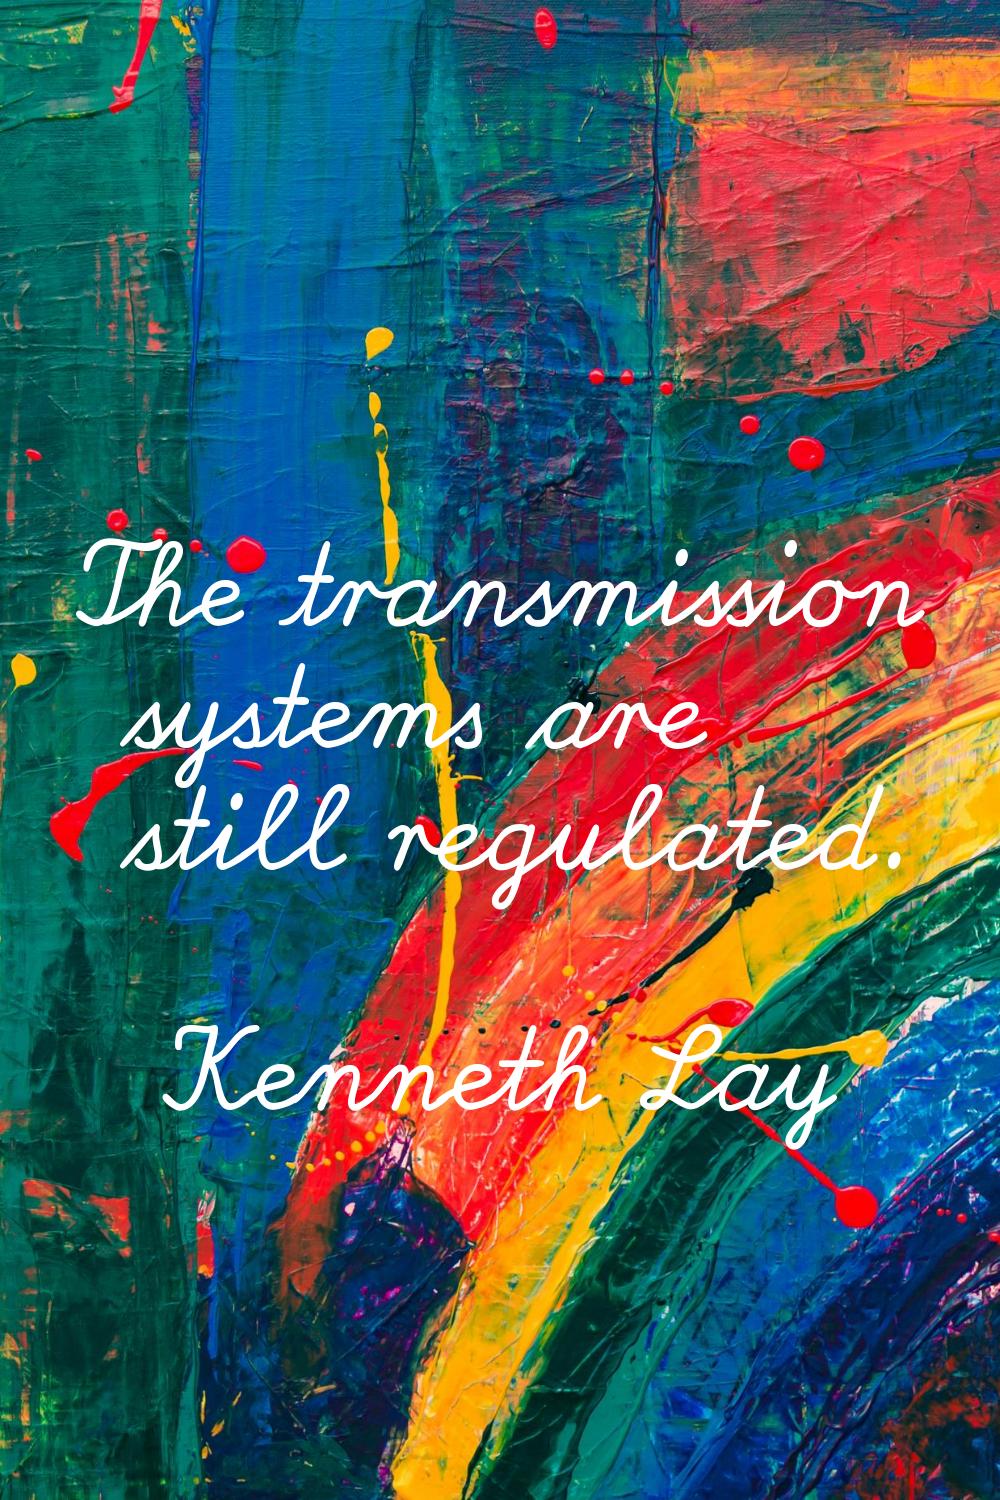 The transmission systems are still regulated.